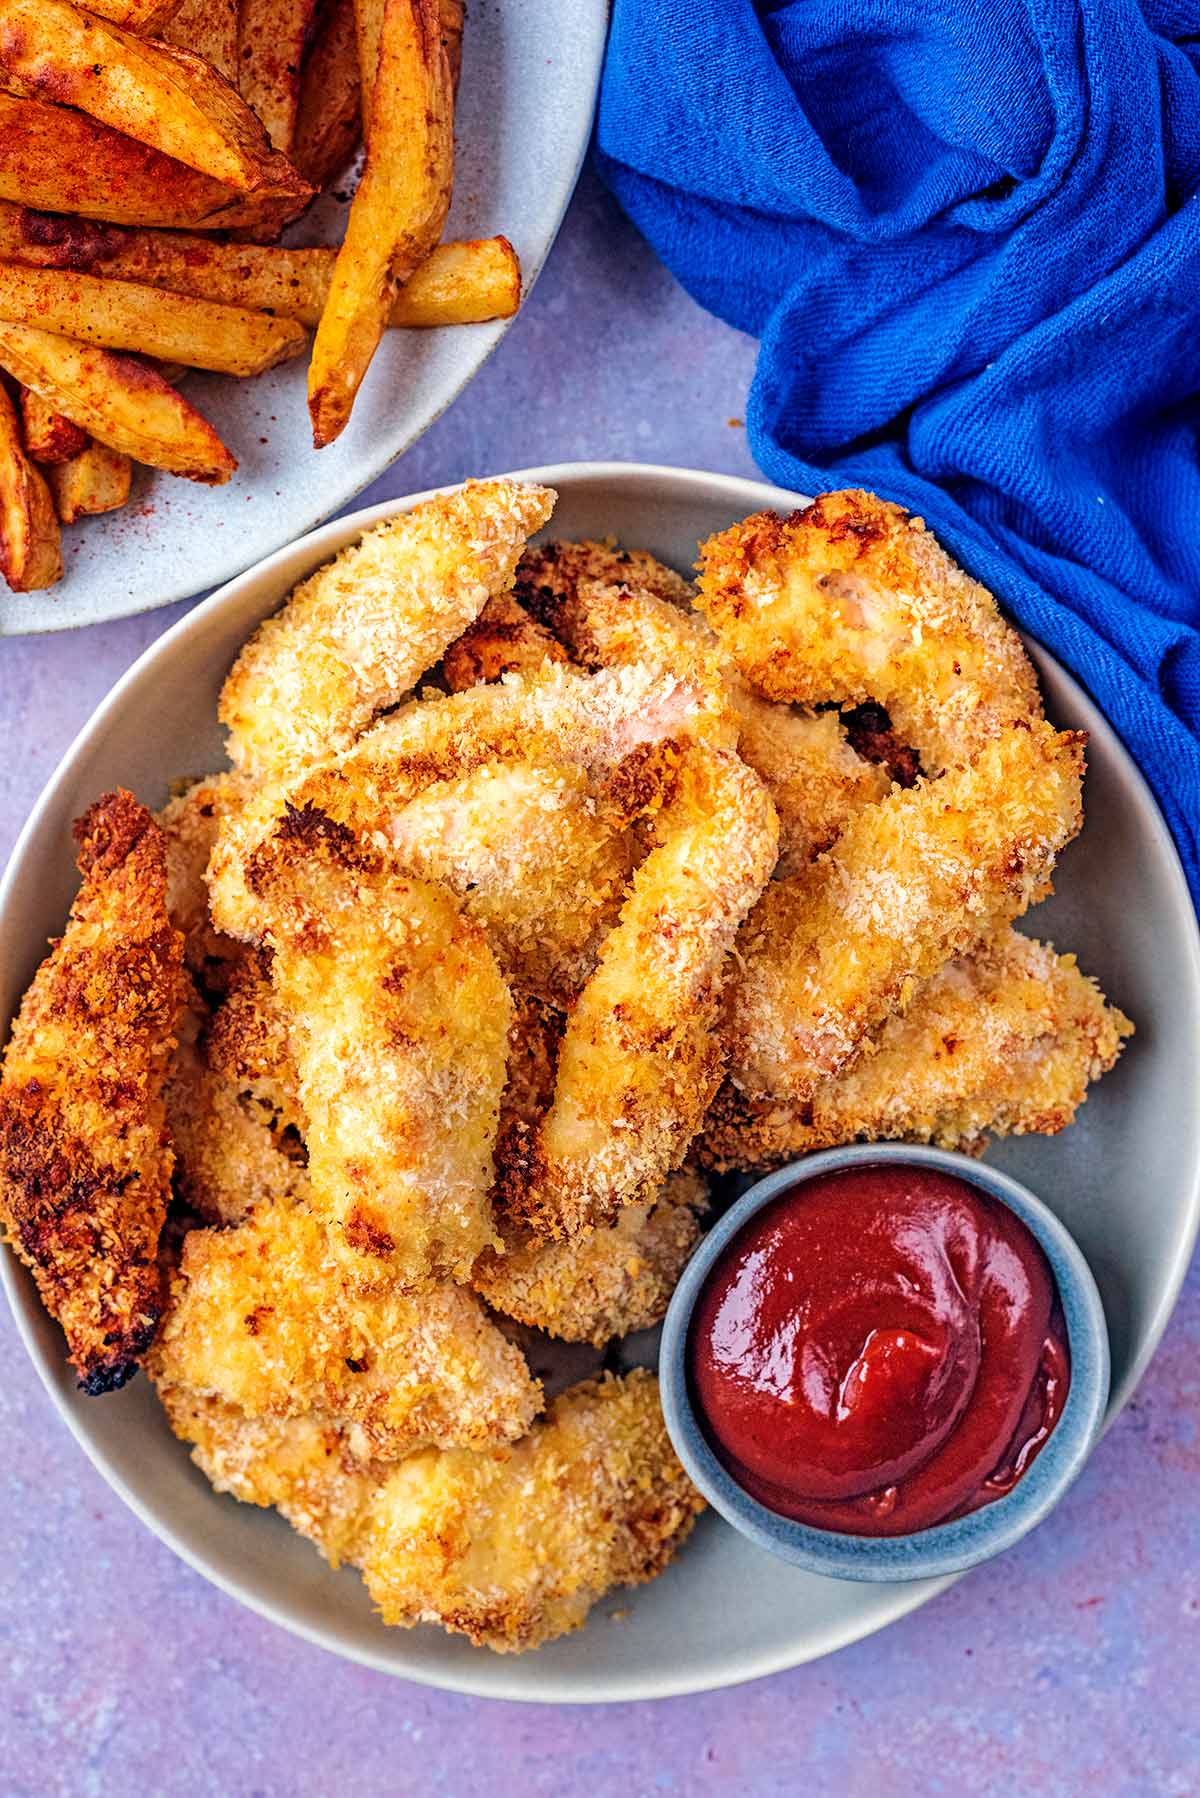 Chicken goujons on a plate with a pot of ketchup.